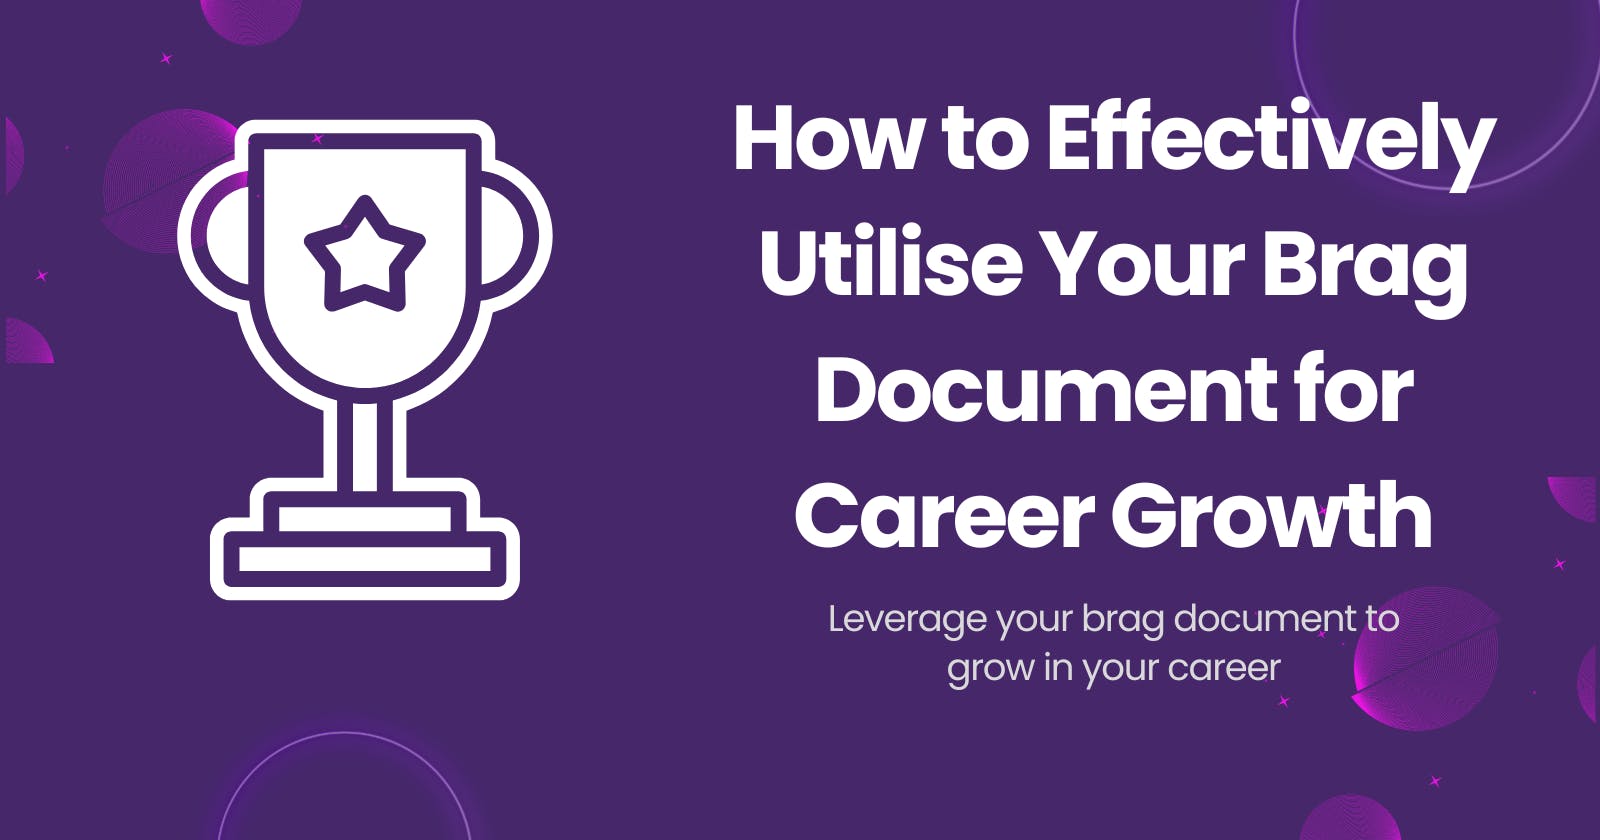 How to Effectively Utilise Your Brag Document for Career Growth